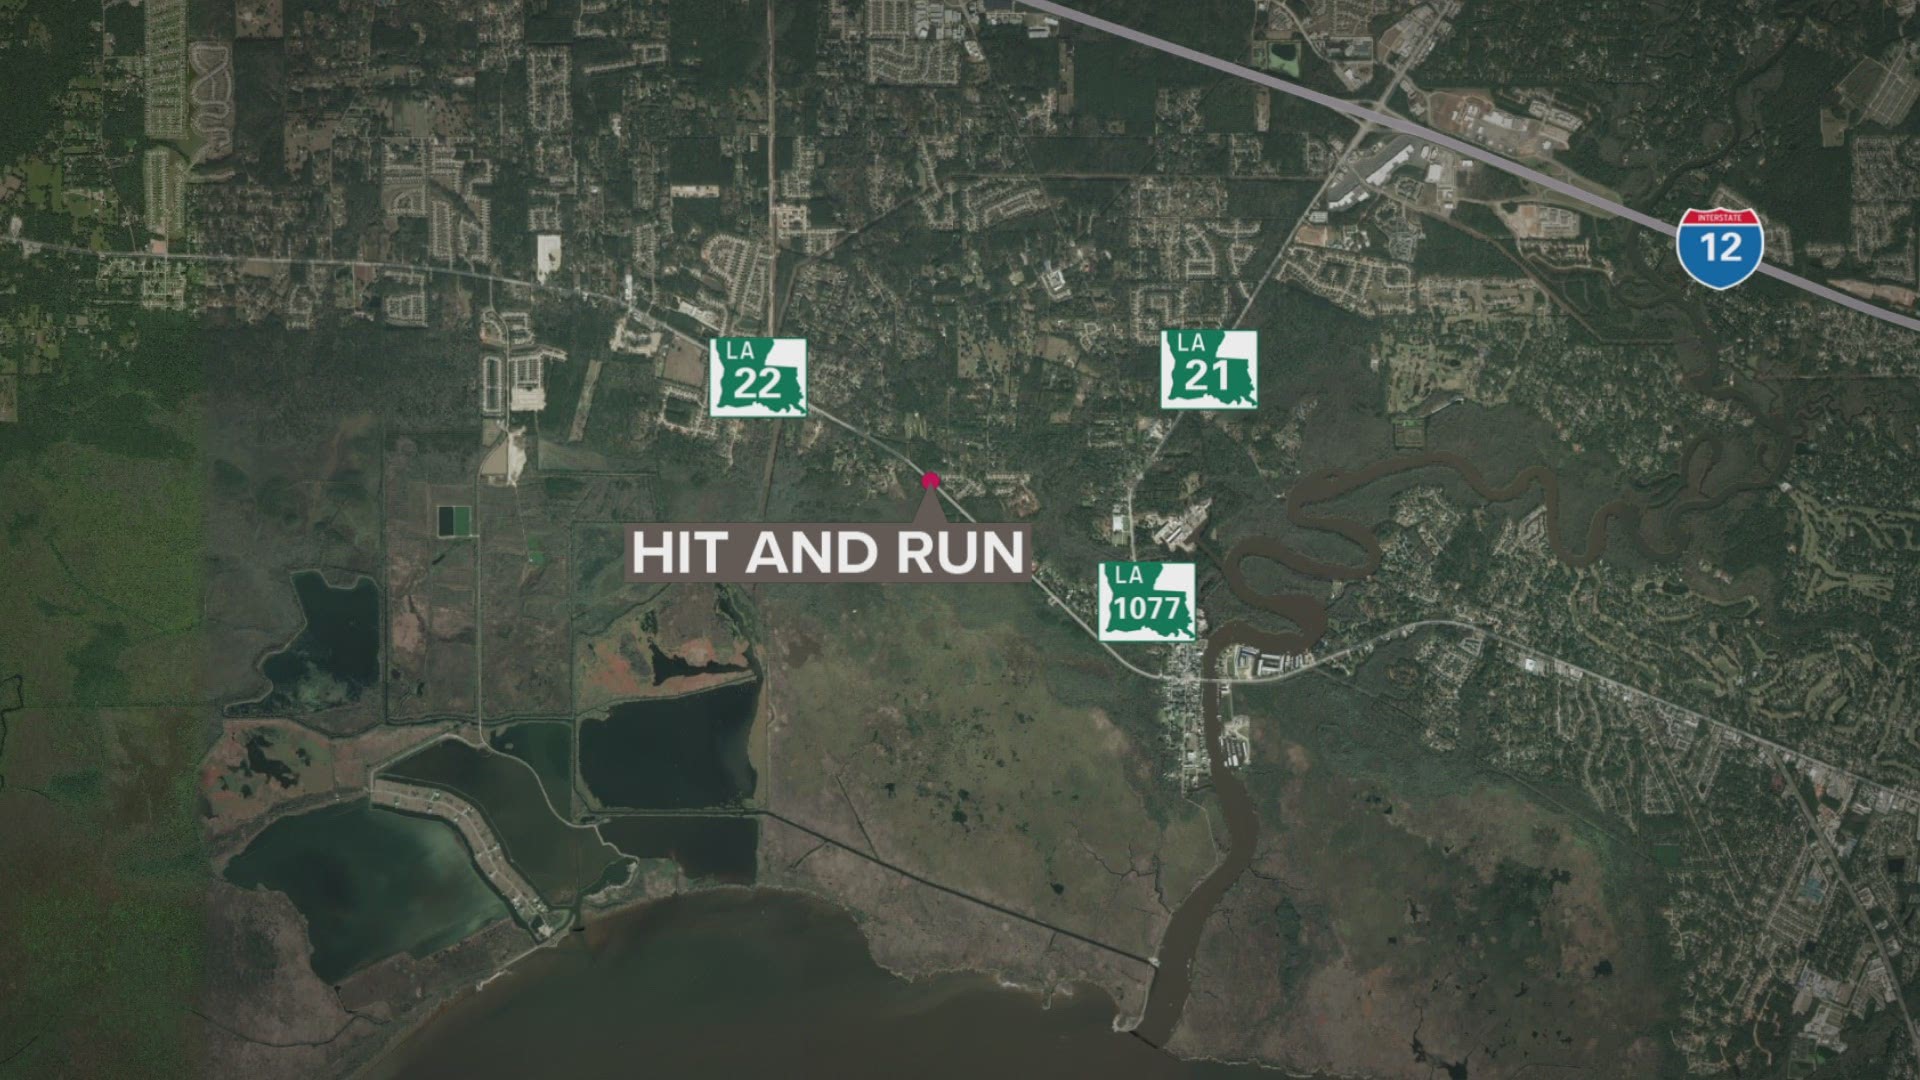 A hit and run in Madisonville leaves one person dead, four others njured and one driver on the run.